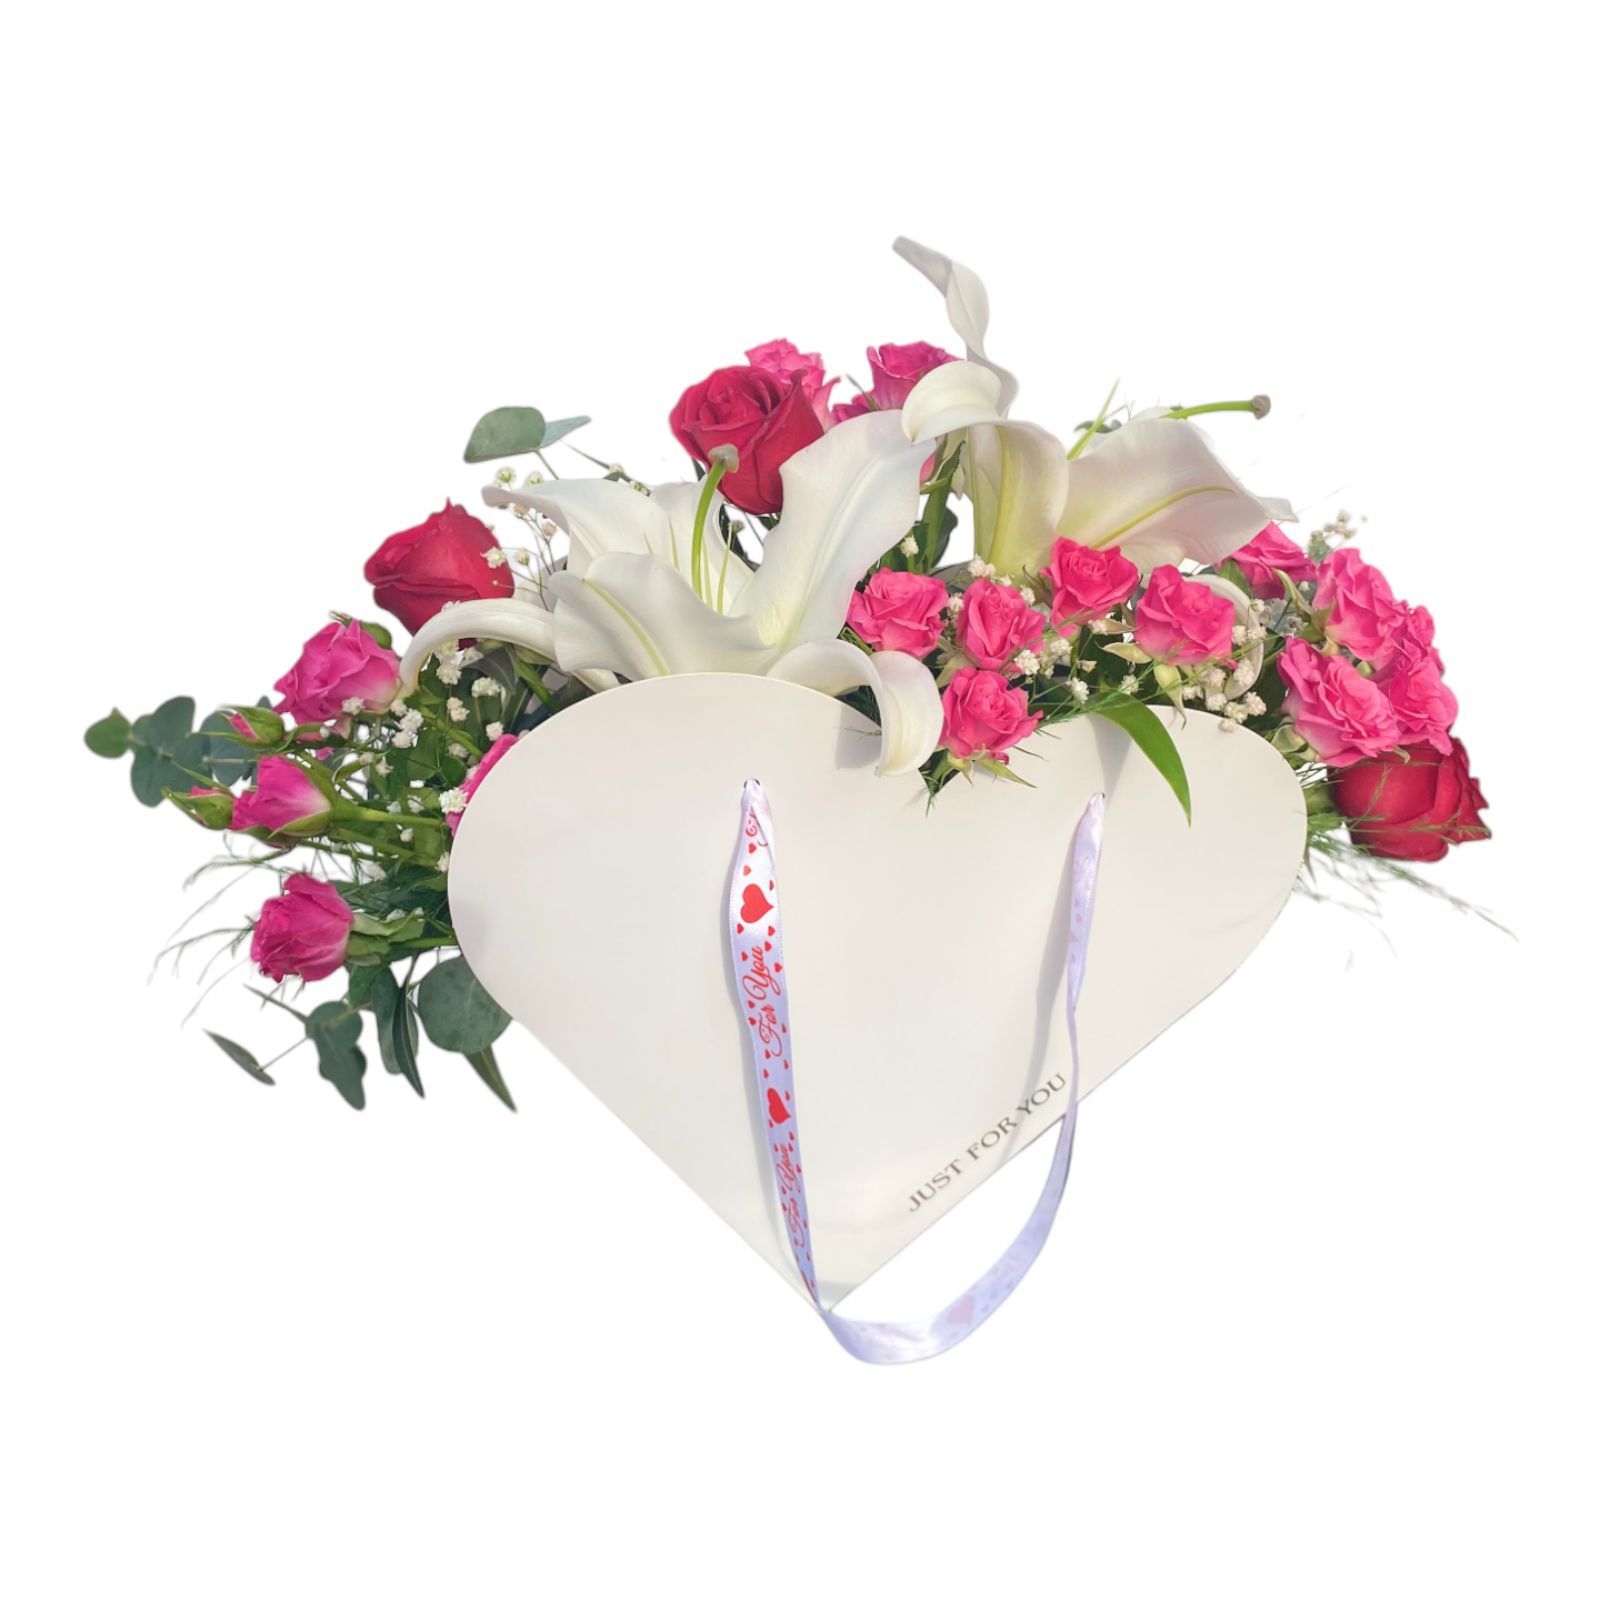 Lilies,%20Red%20Roses,%20Pink%20Arbor%20Roses%20in%20a%20Heart%20Flower%20Bag